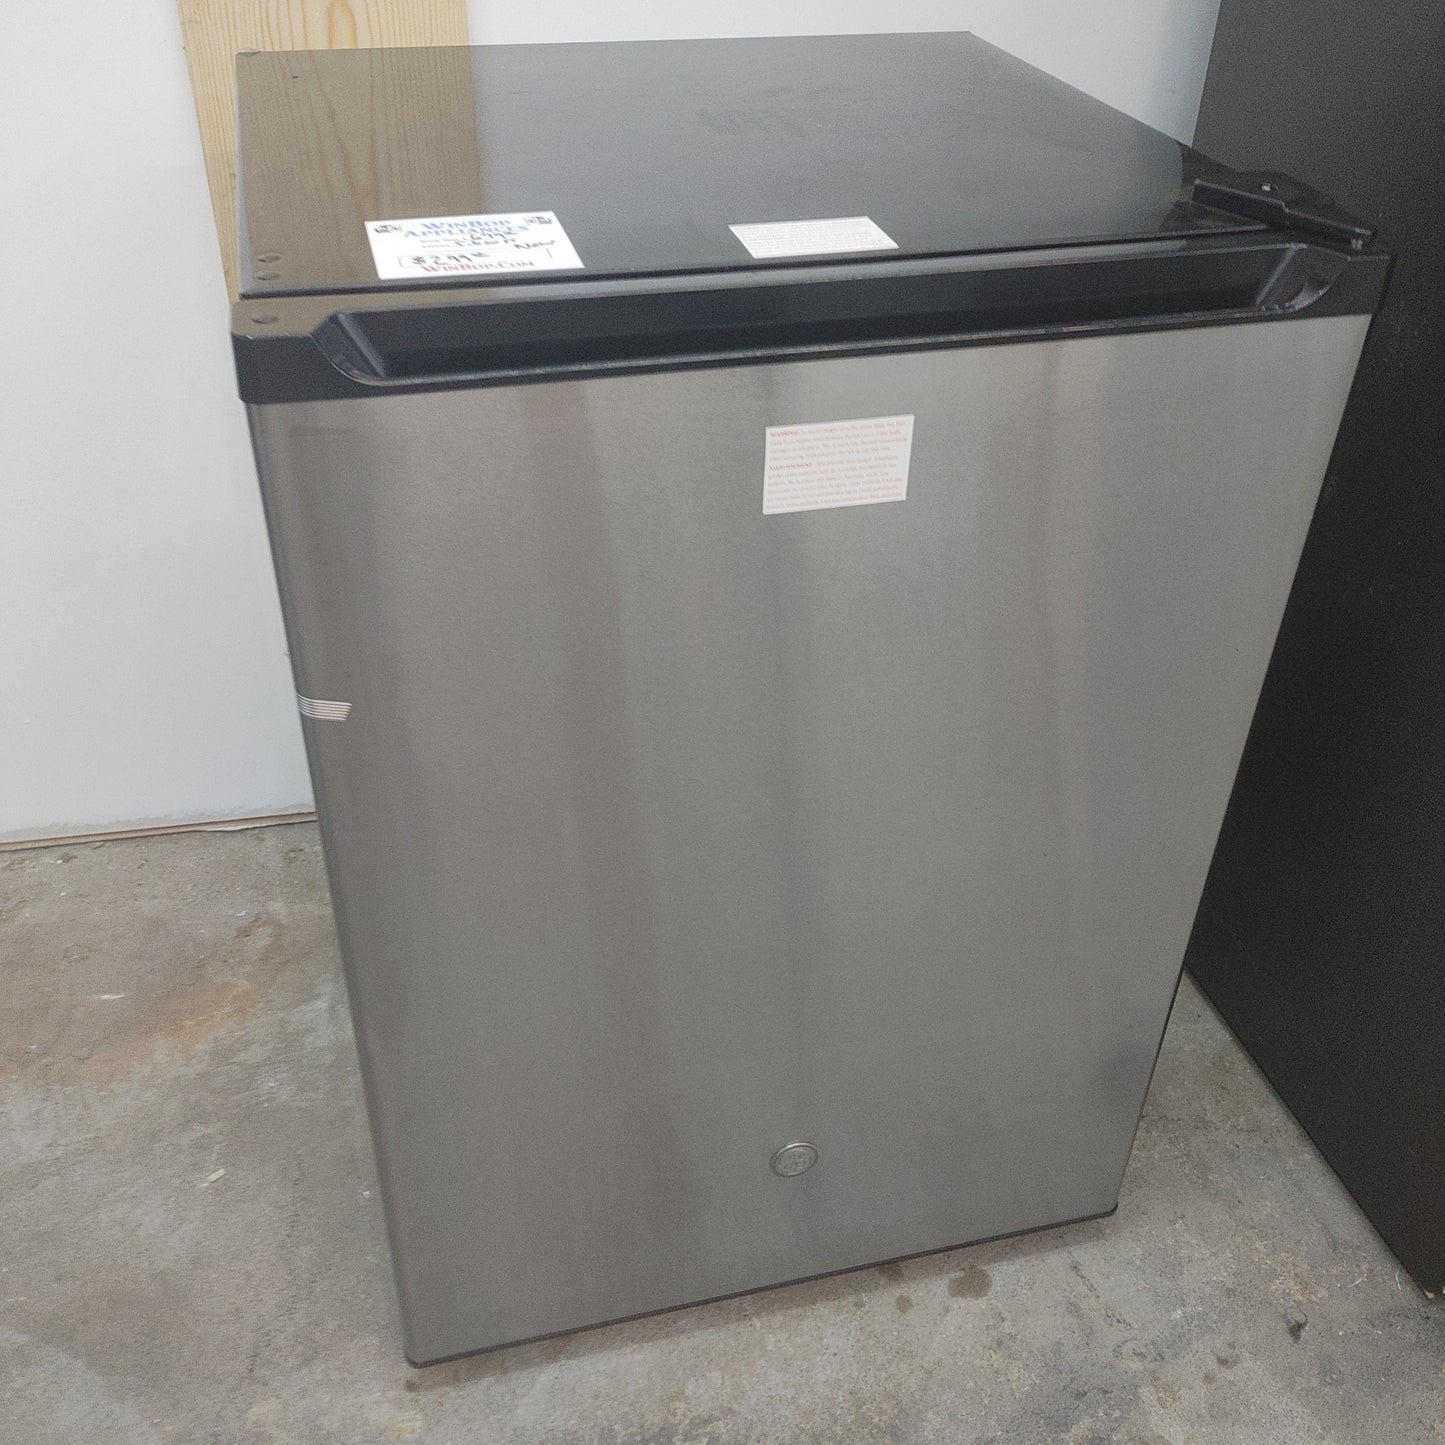 New GE 5.6 cubic ft Small Refrigerator with freezer compartment